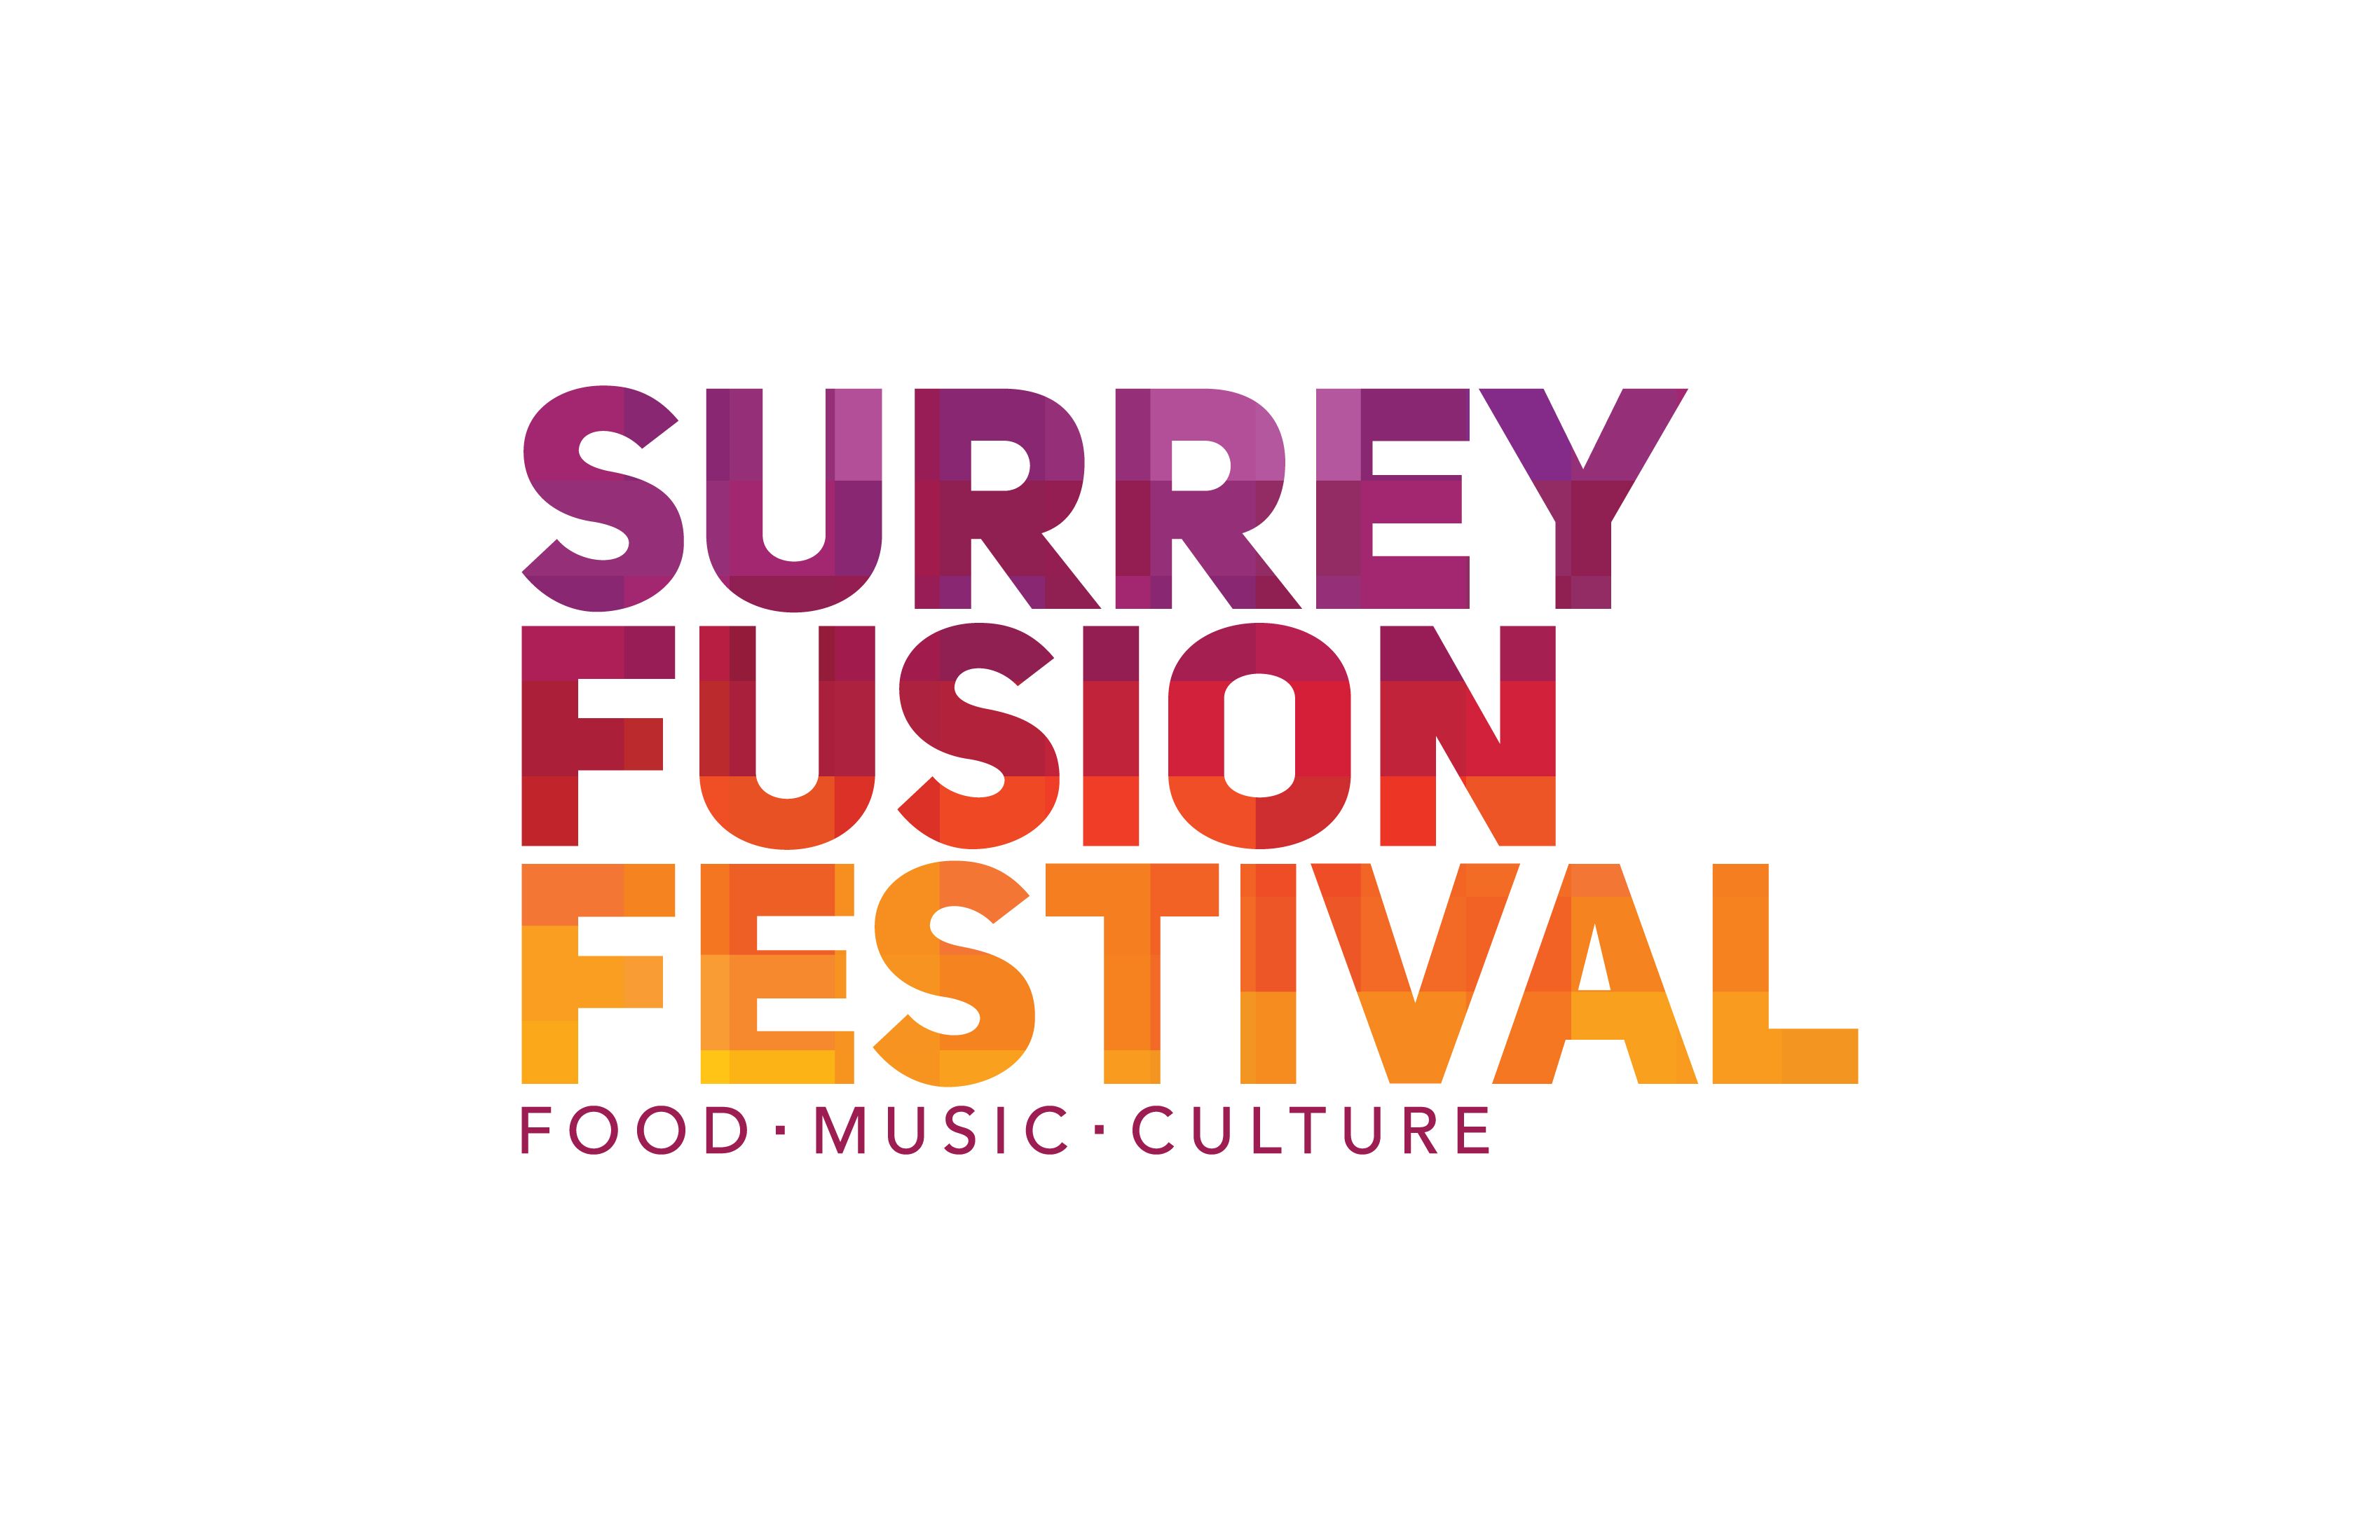 A mosaic logo of the words Surrey, Fusion, and Festival.